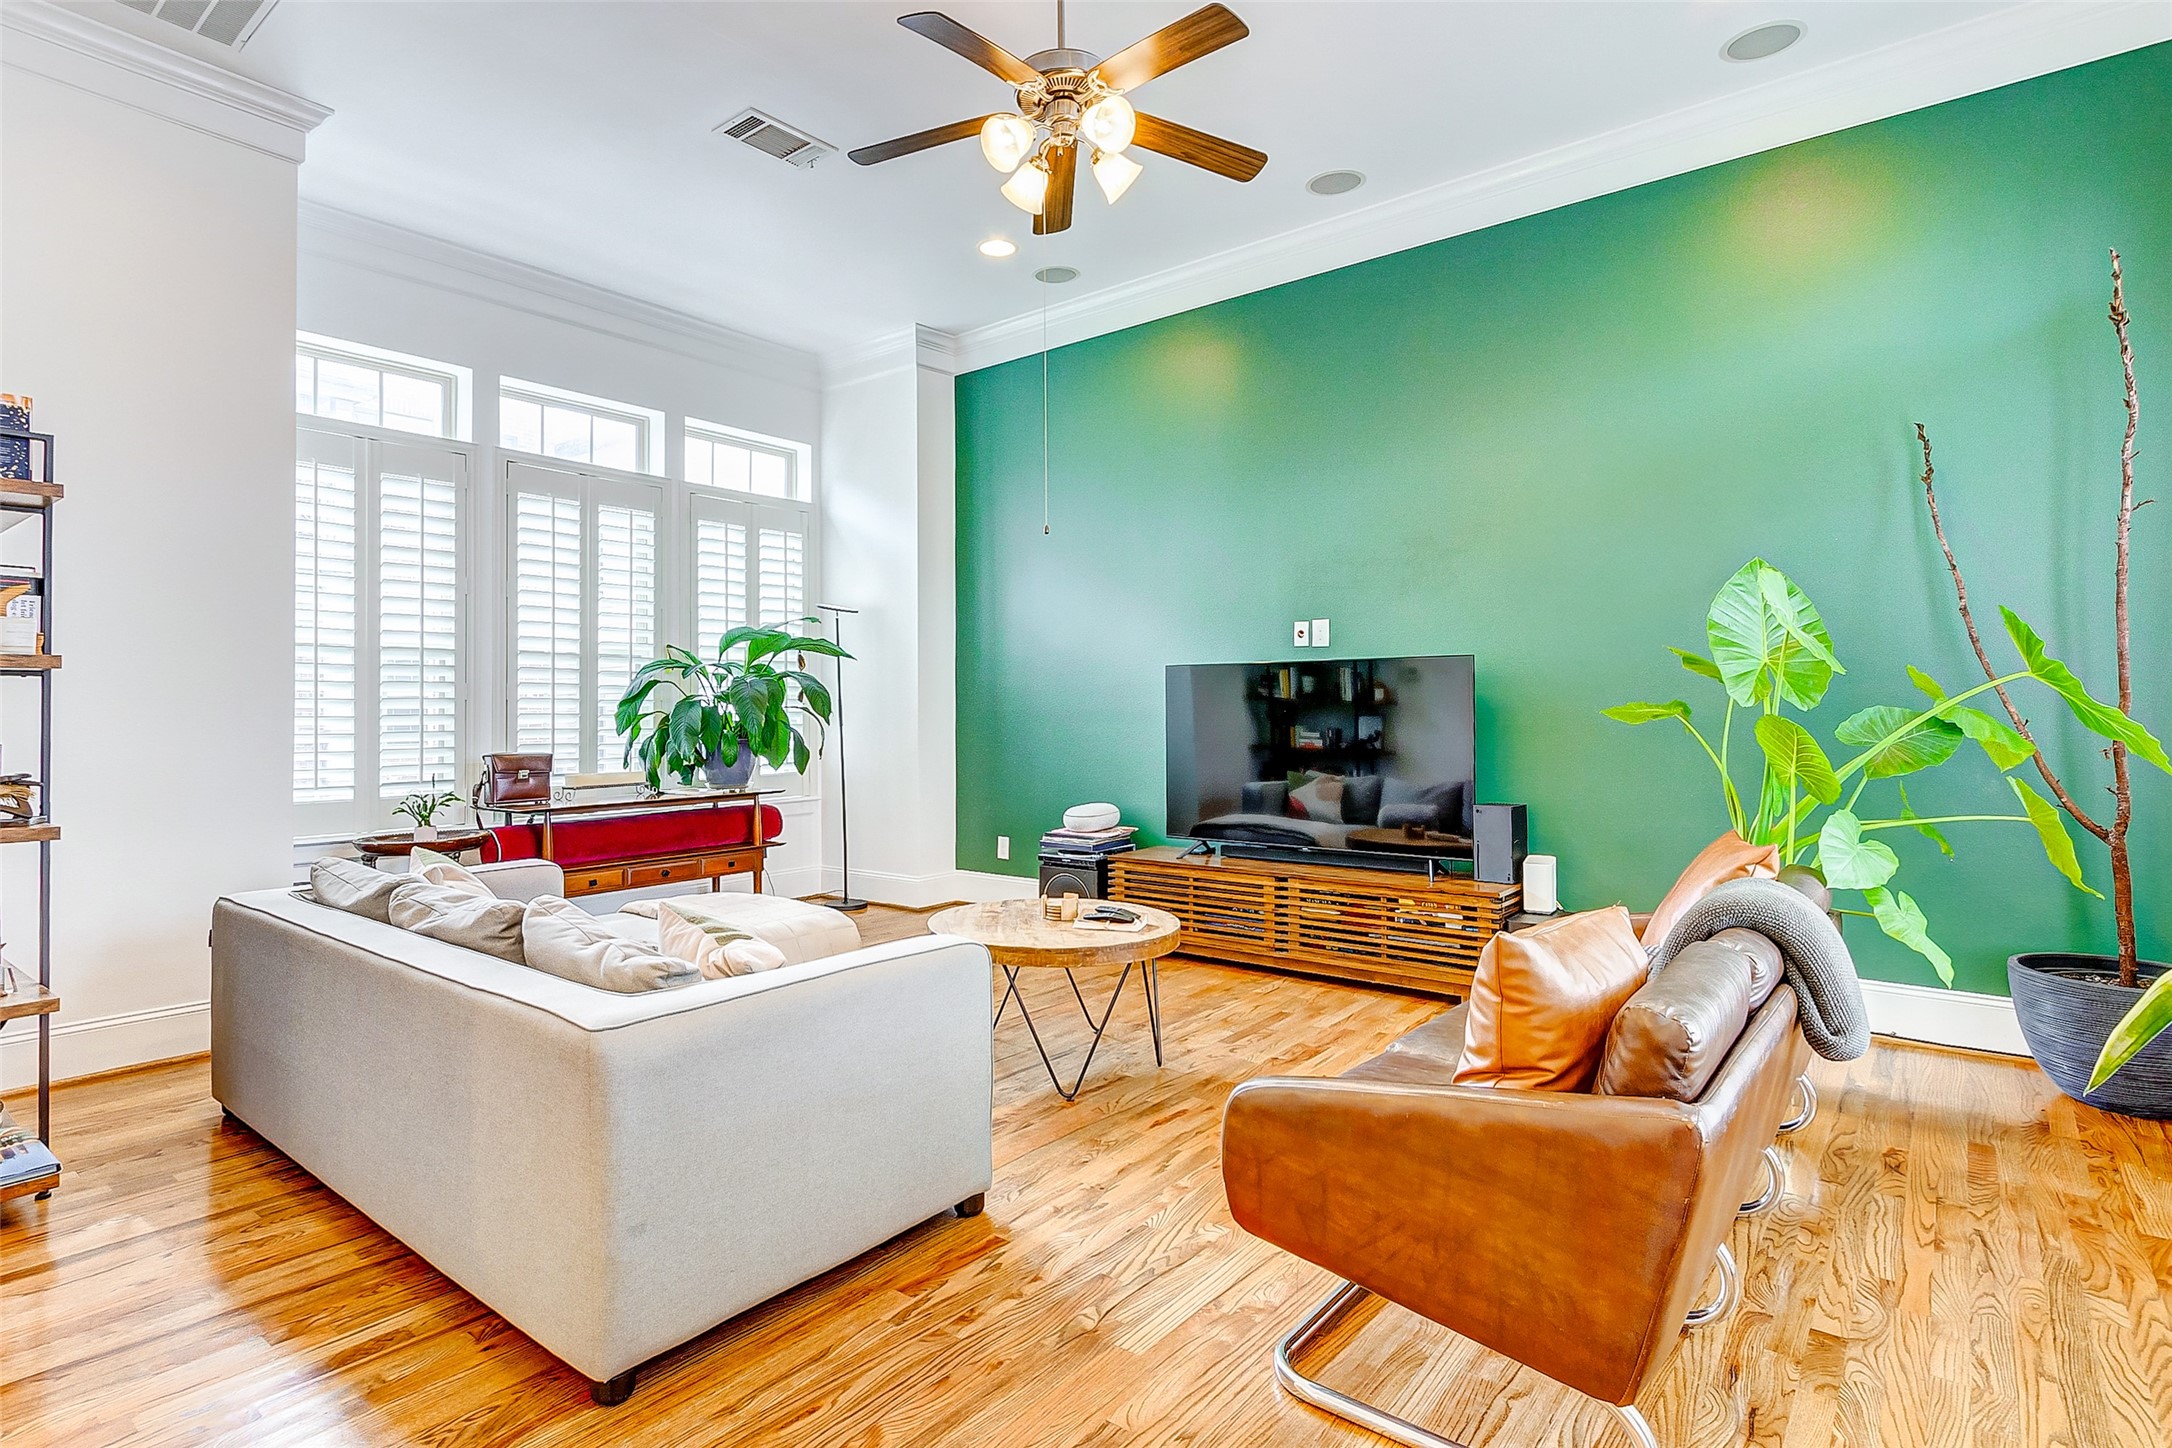 Welcome to you spacious family room featuring soaring ceilings, stunning emerald accent wall, gorgeous wood flooring, plentiful natural lighting, custom plantation shutters, and comes complete with built-in speakers!